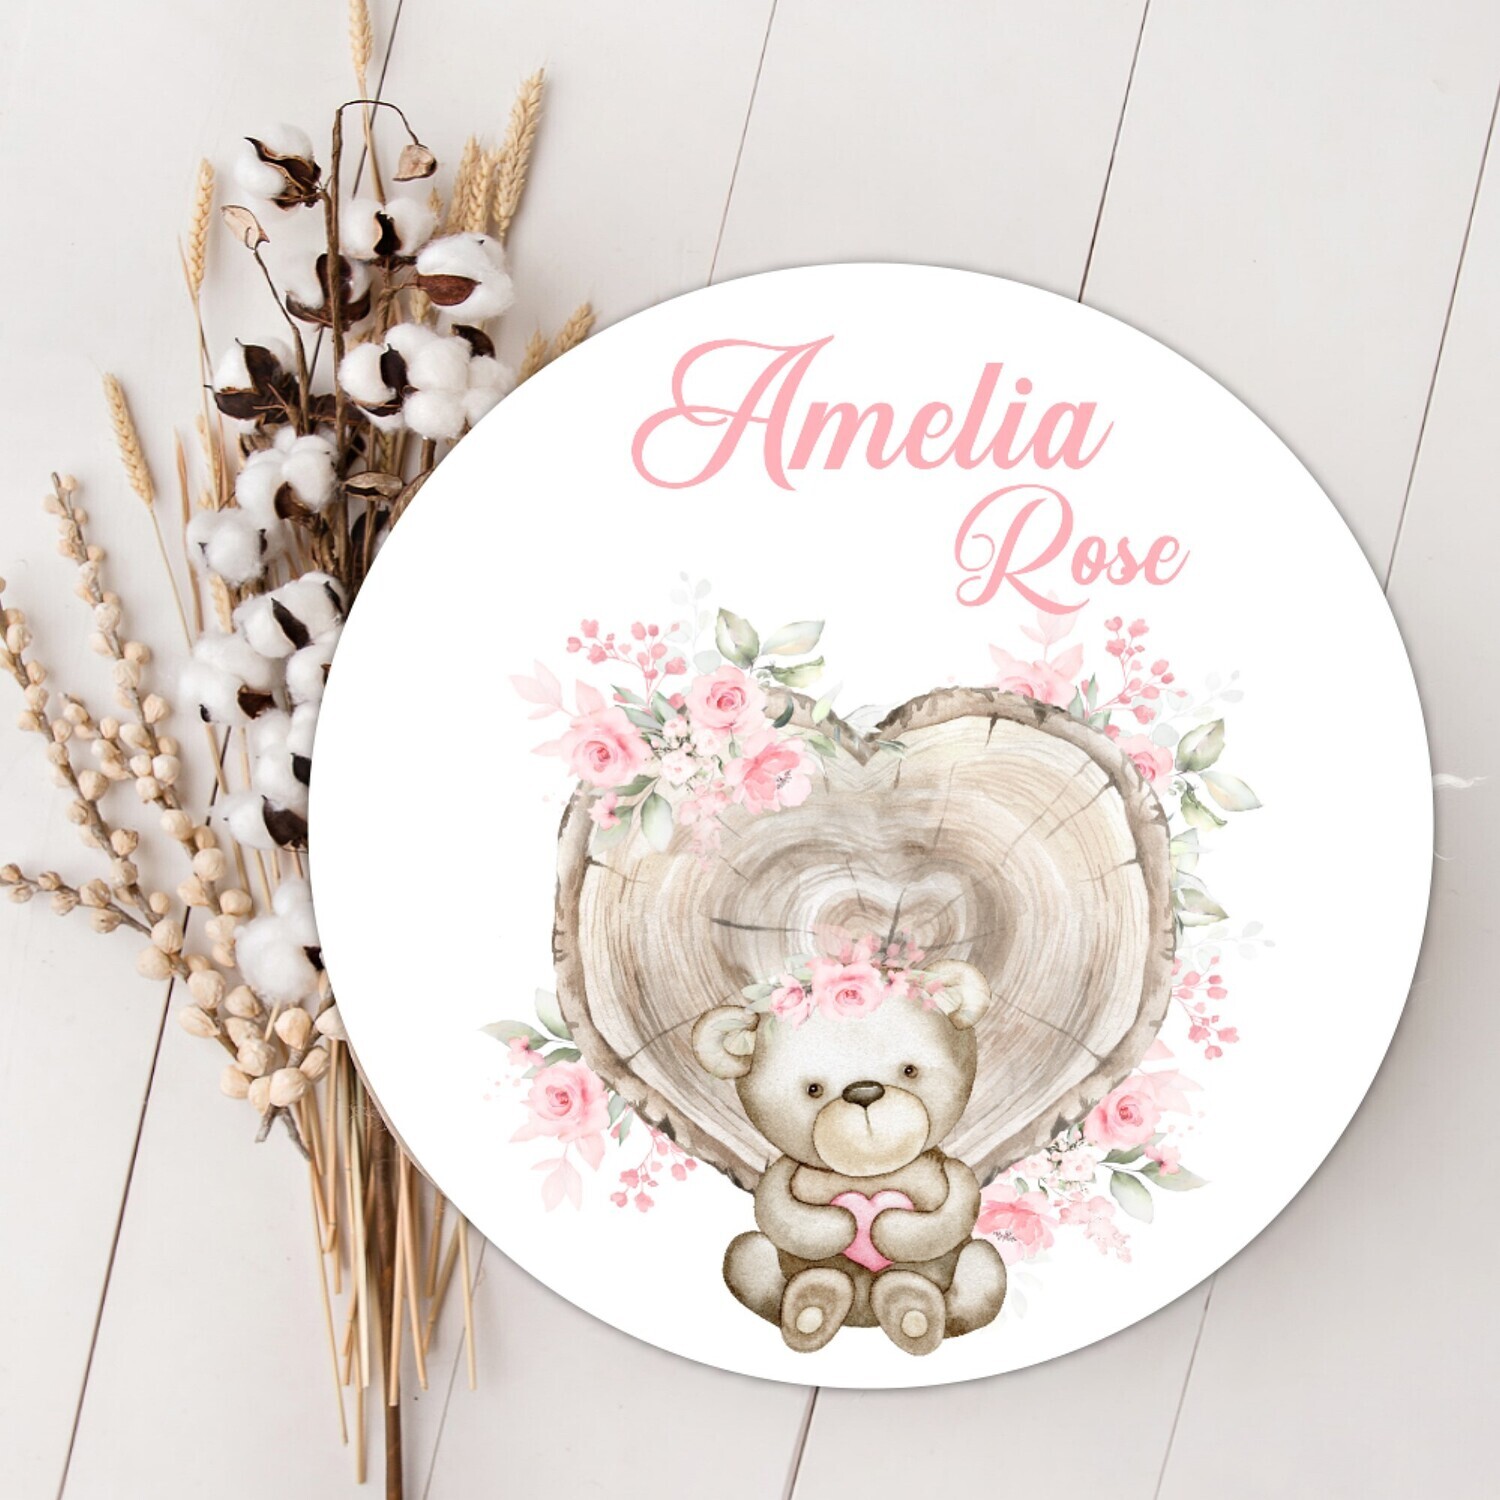 Pink Roses Teddy Bear Personalized Wood Sign, Baby Name Sign, Birth Announcement Sign, Wood Wall Decor, Baby Nursery Decor Baby, Gift, Fresh 48 Photo Prop